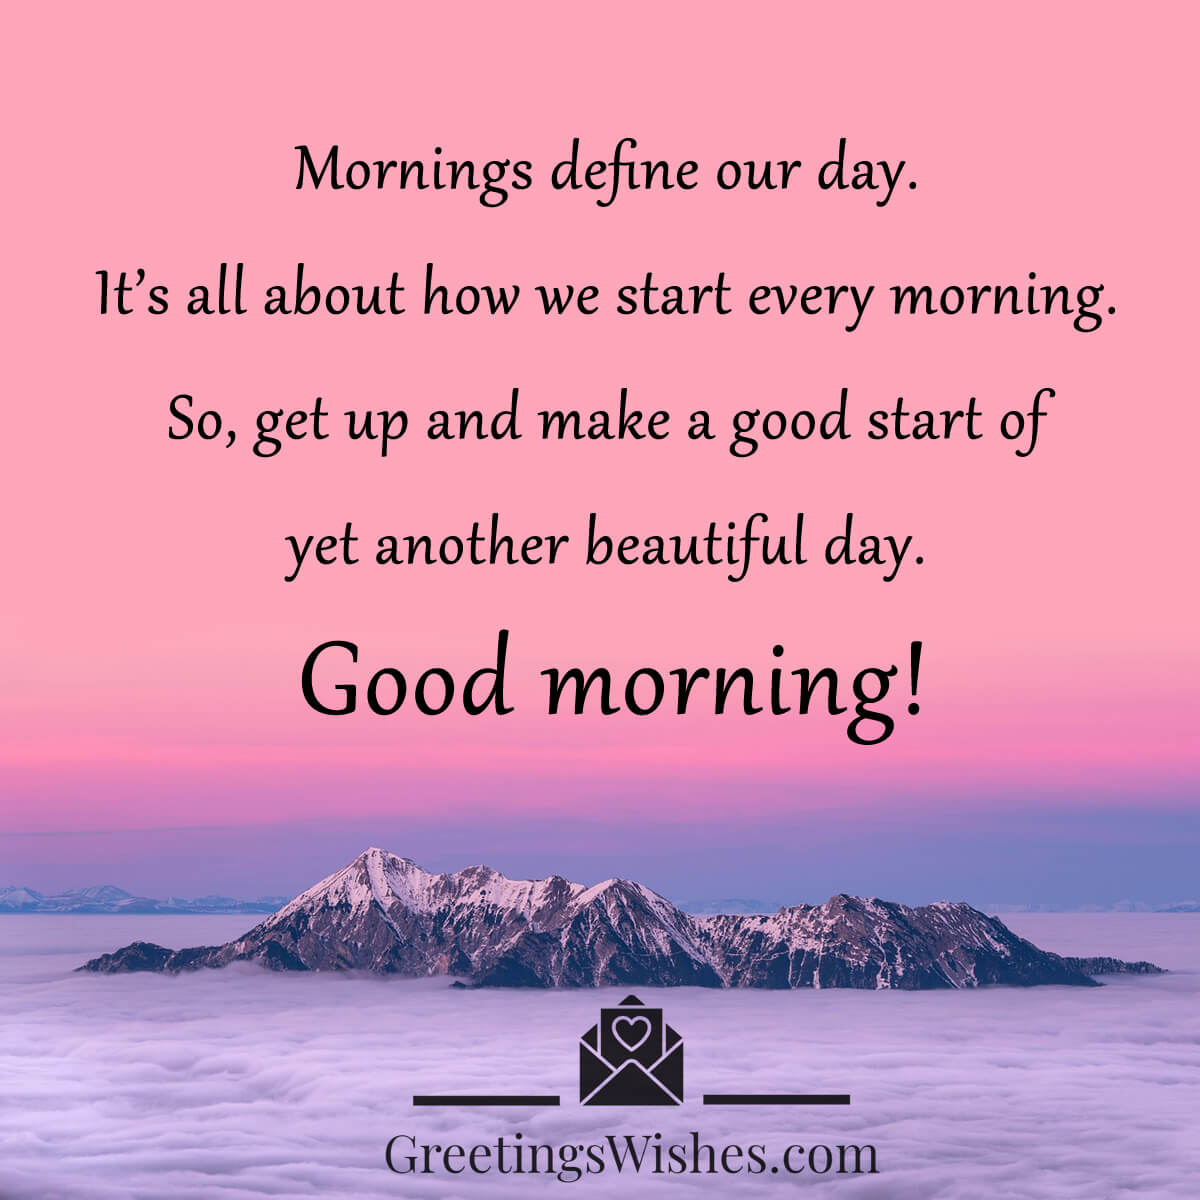 Good Morning Wishes Messages - Greetings Wishes